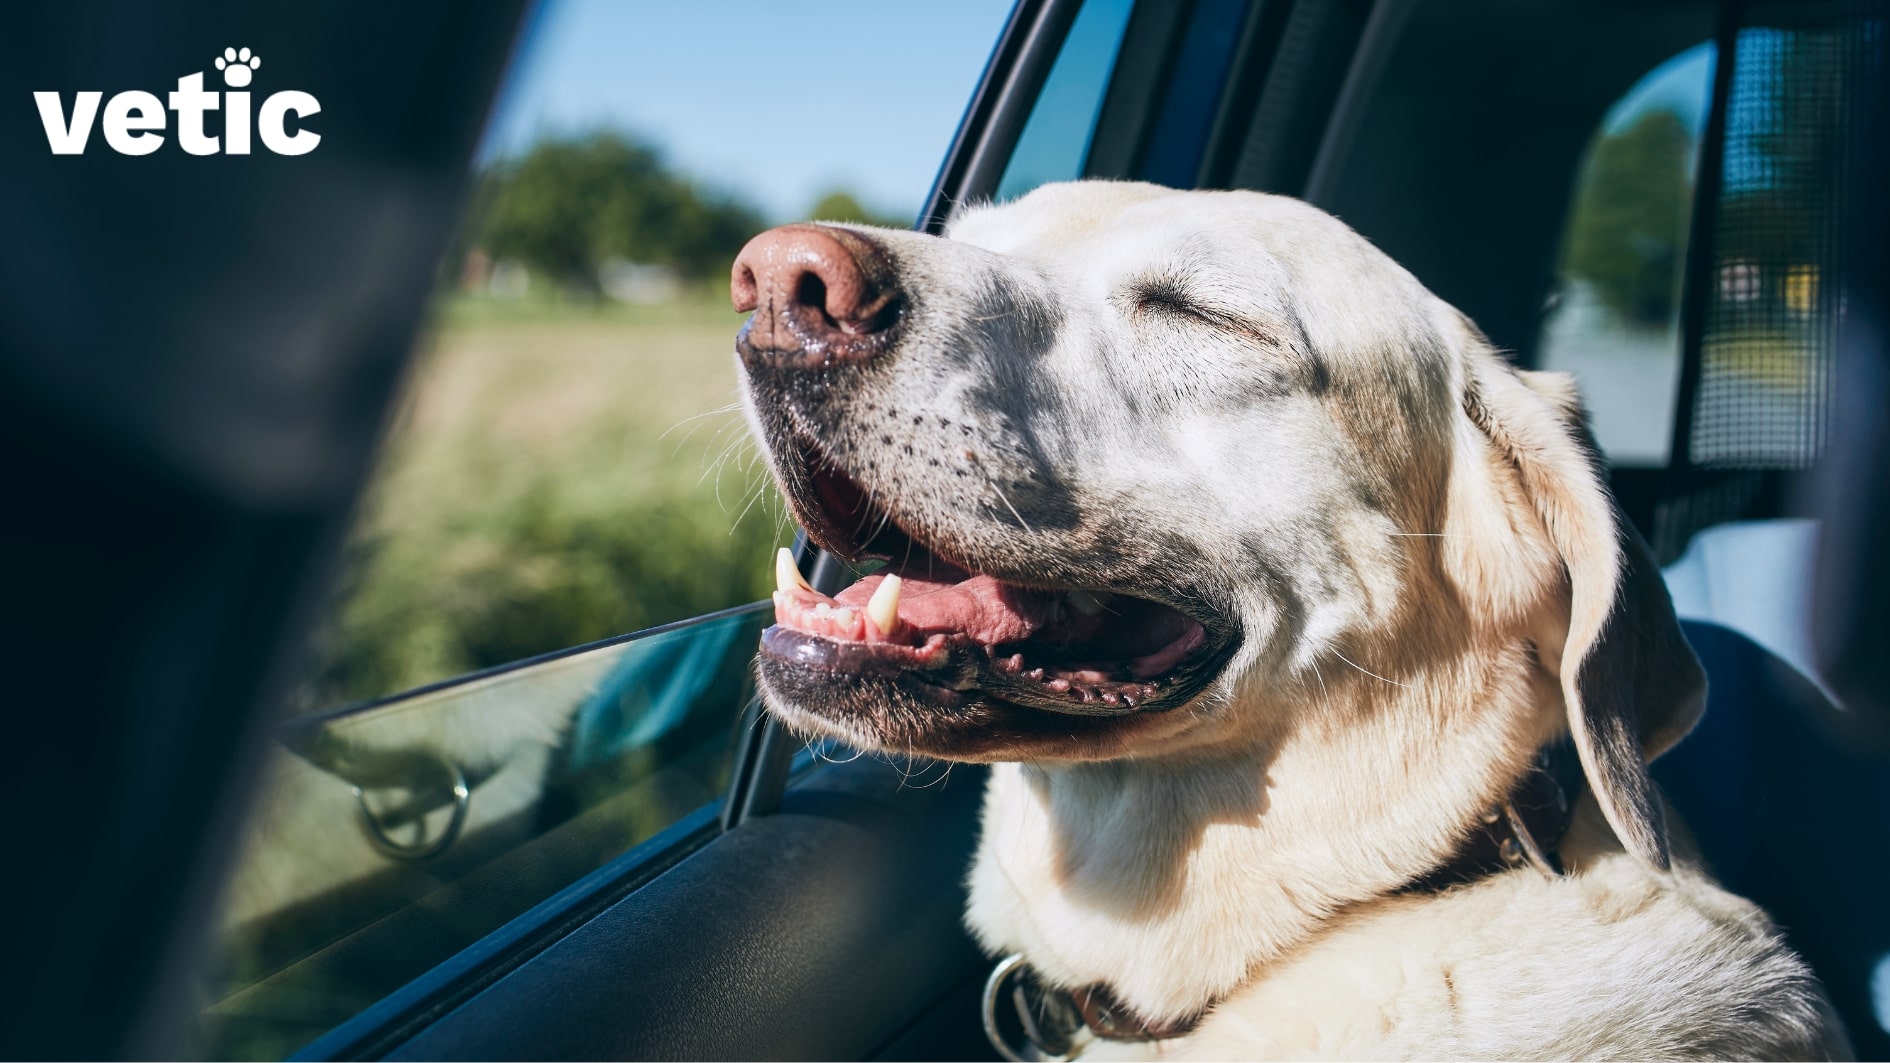 Fawn labrador retriever wearing a black collar, enjoying a car ride. The car window has been rolled down. Fresh wind can reduce the signs of travel sickness such as excessive drooling in dogs.